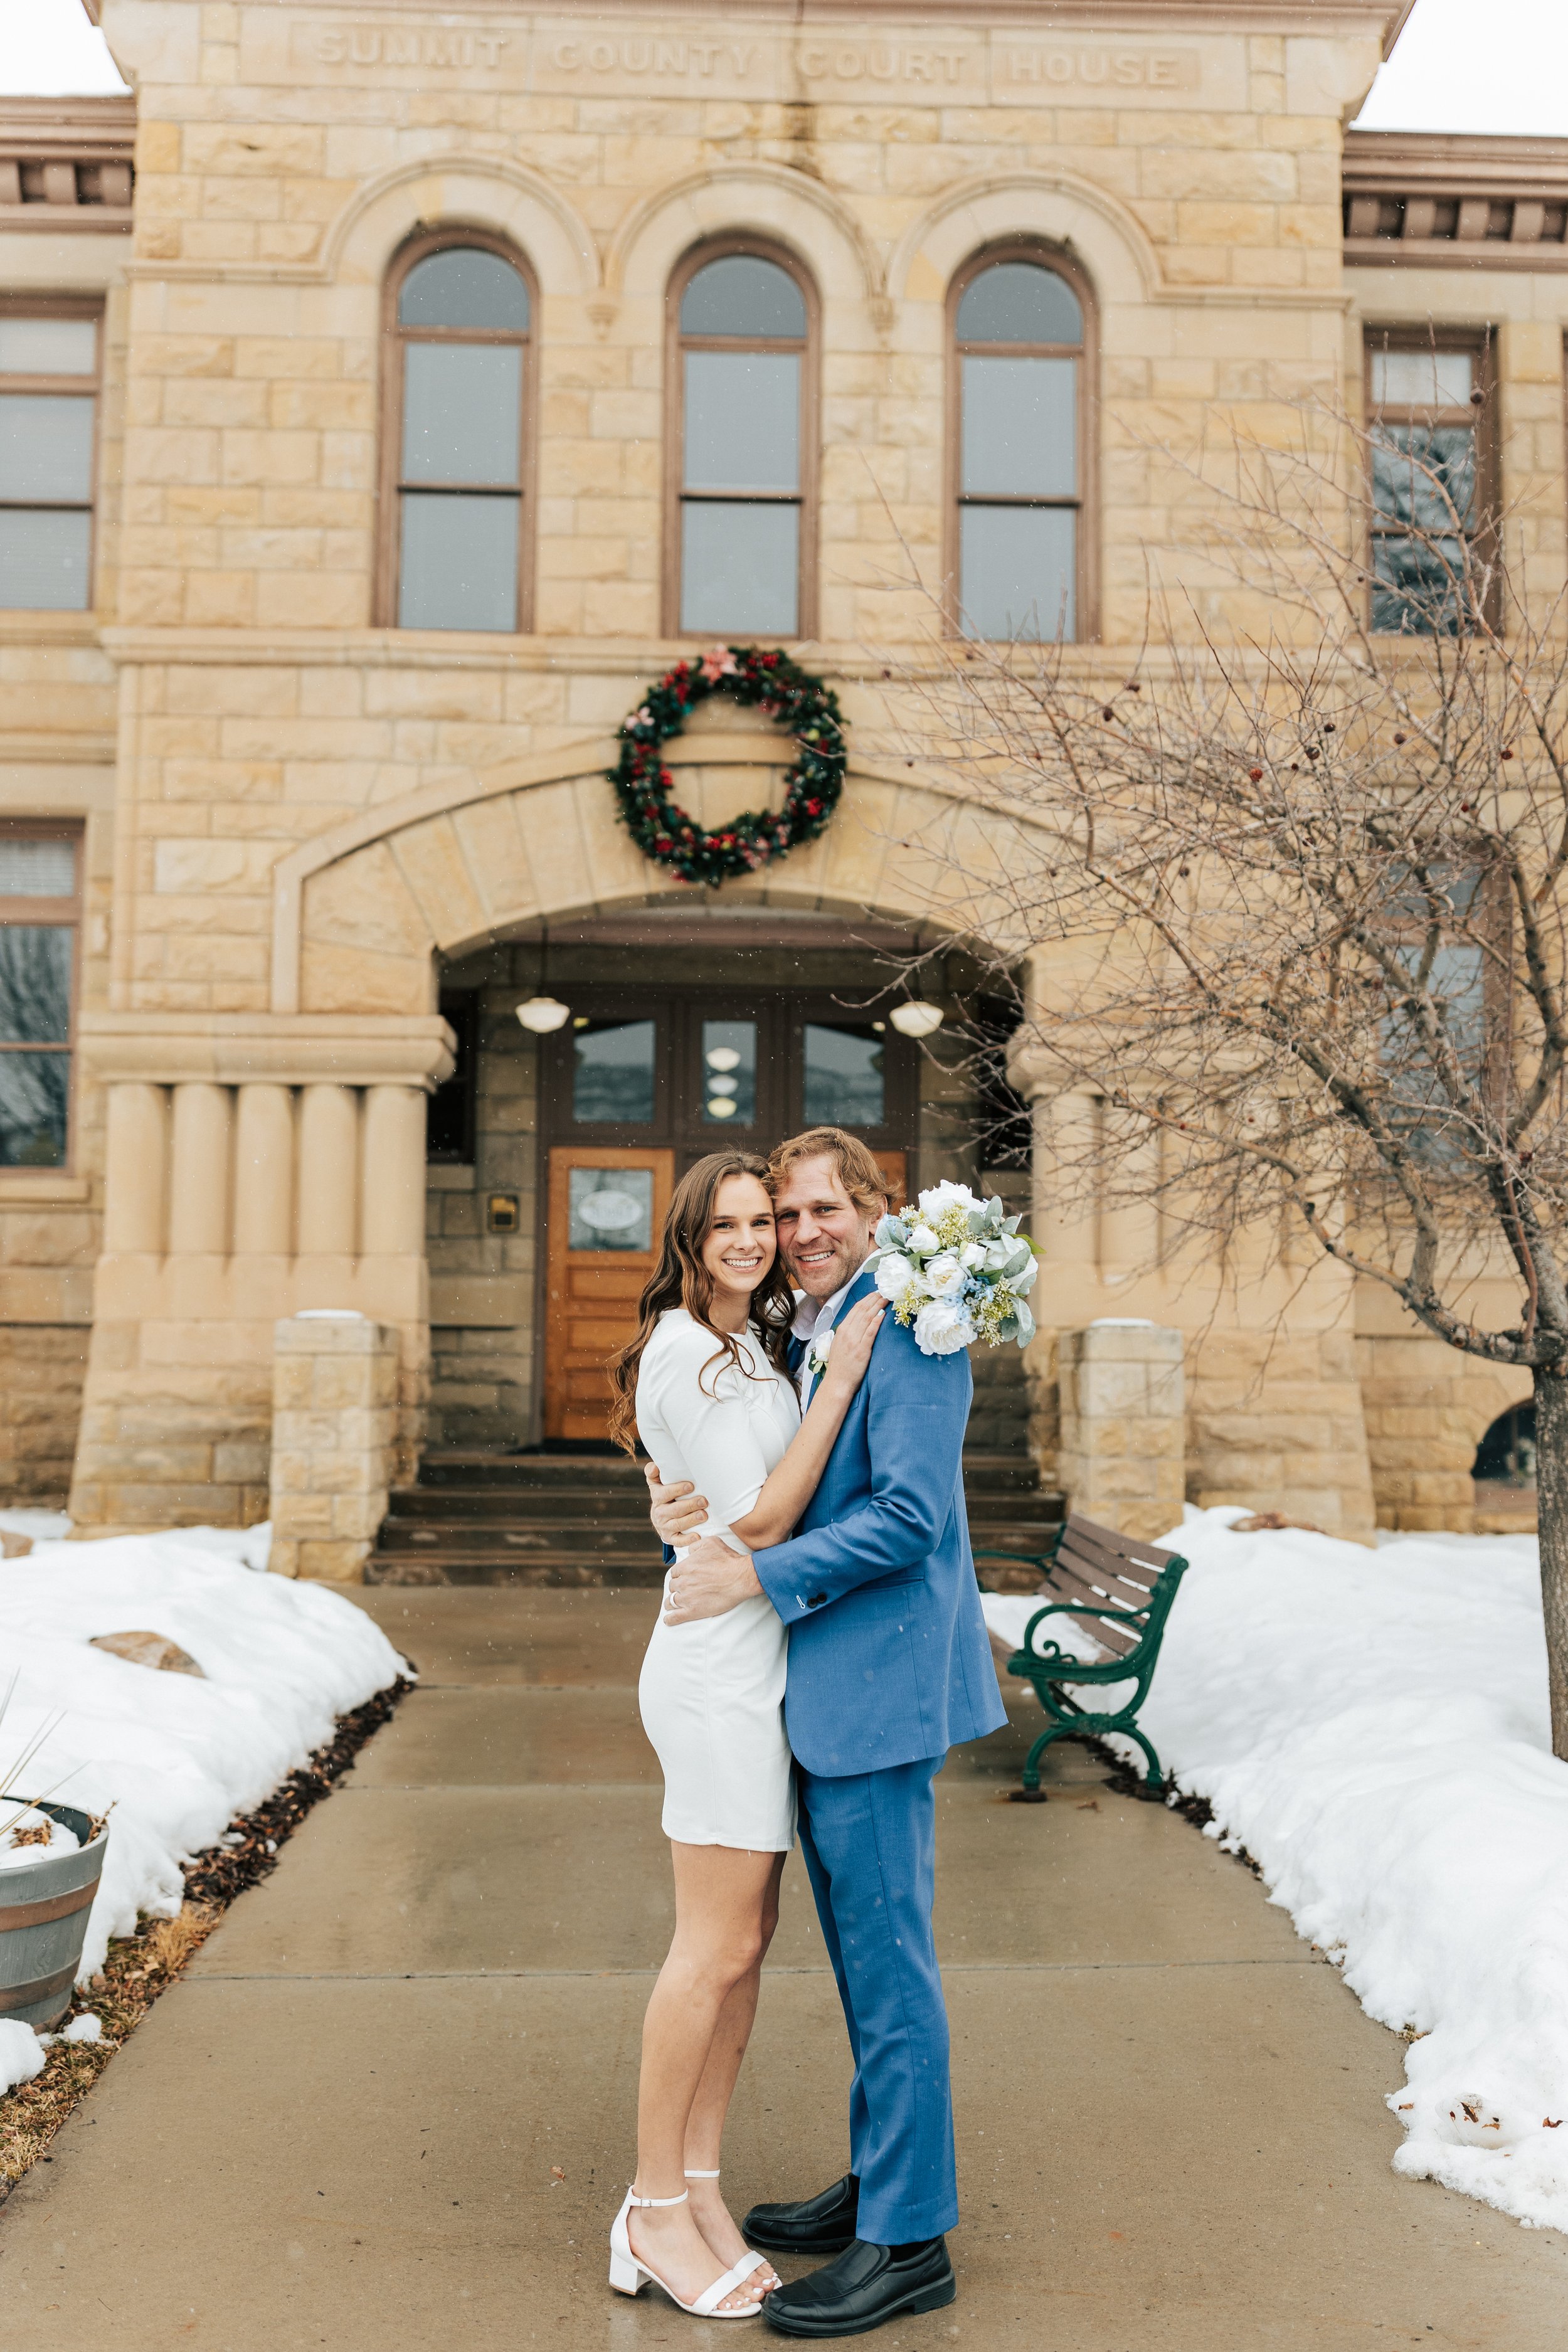  If you plan to elope in park city utah you need to elope at the summit county courthouse in coalville utah near beautiful mountain backdrops perfect for winter wedding photography emily jenkins photo #elopement #parkcityutah #parkcity #parkcityelope